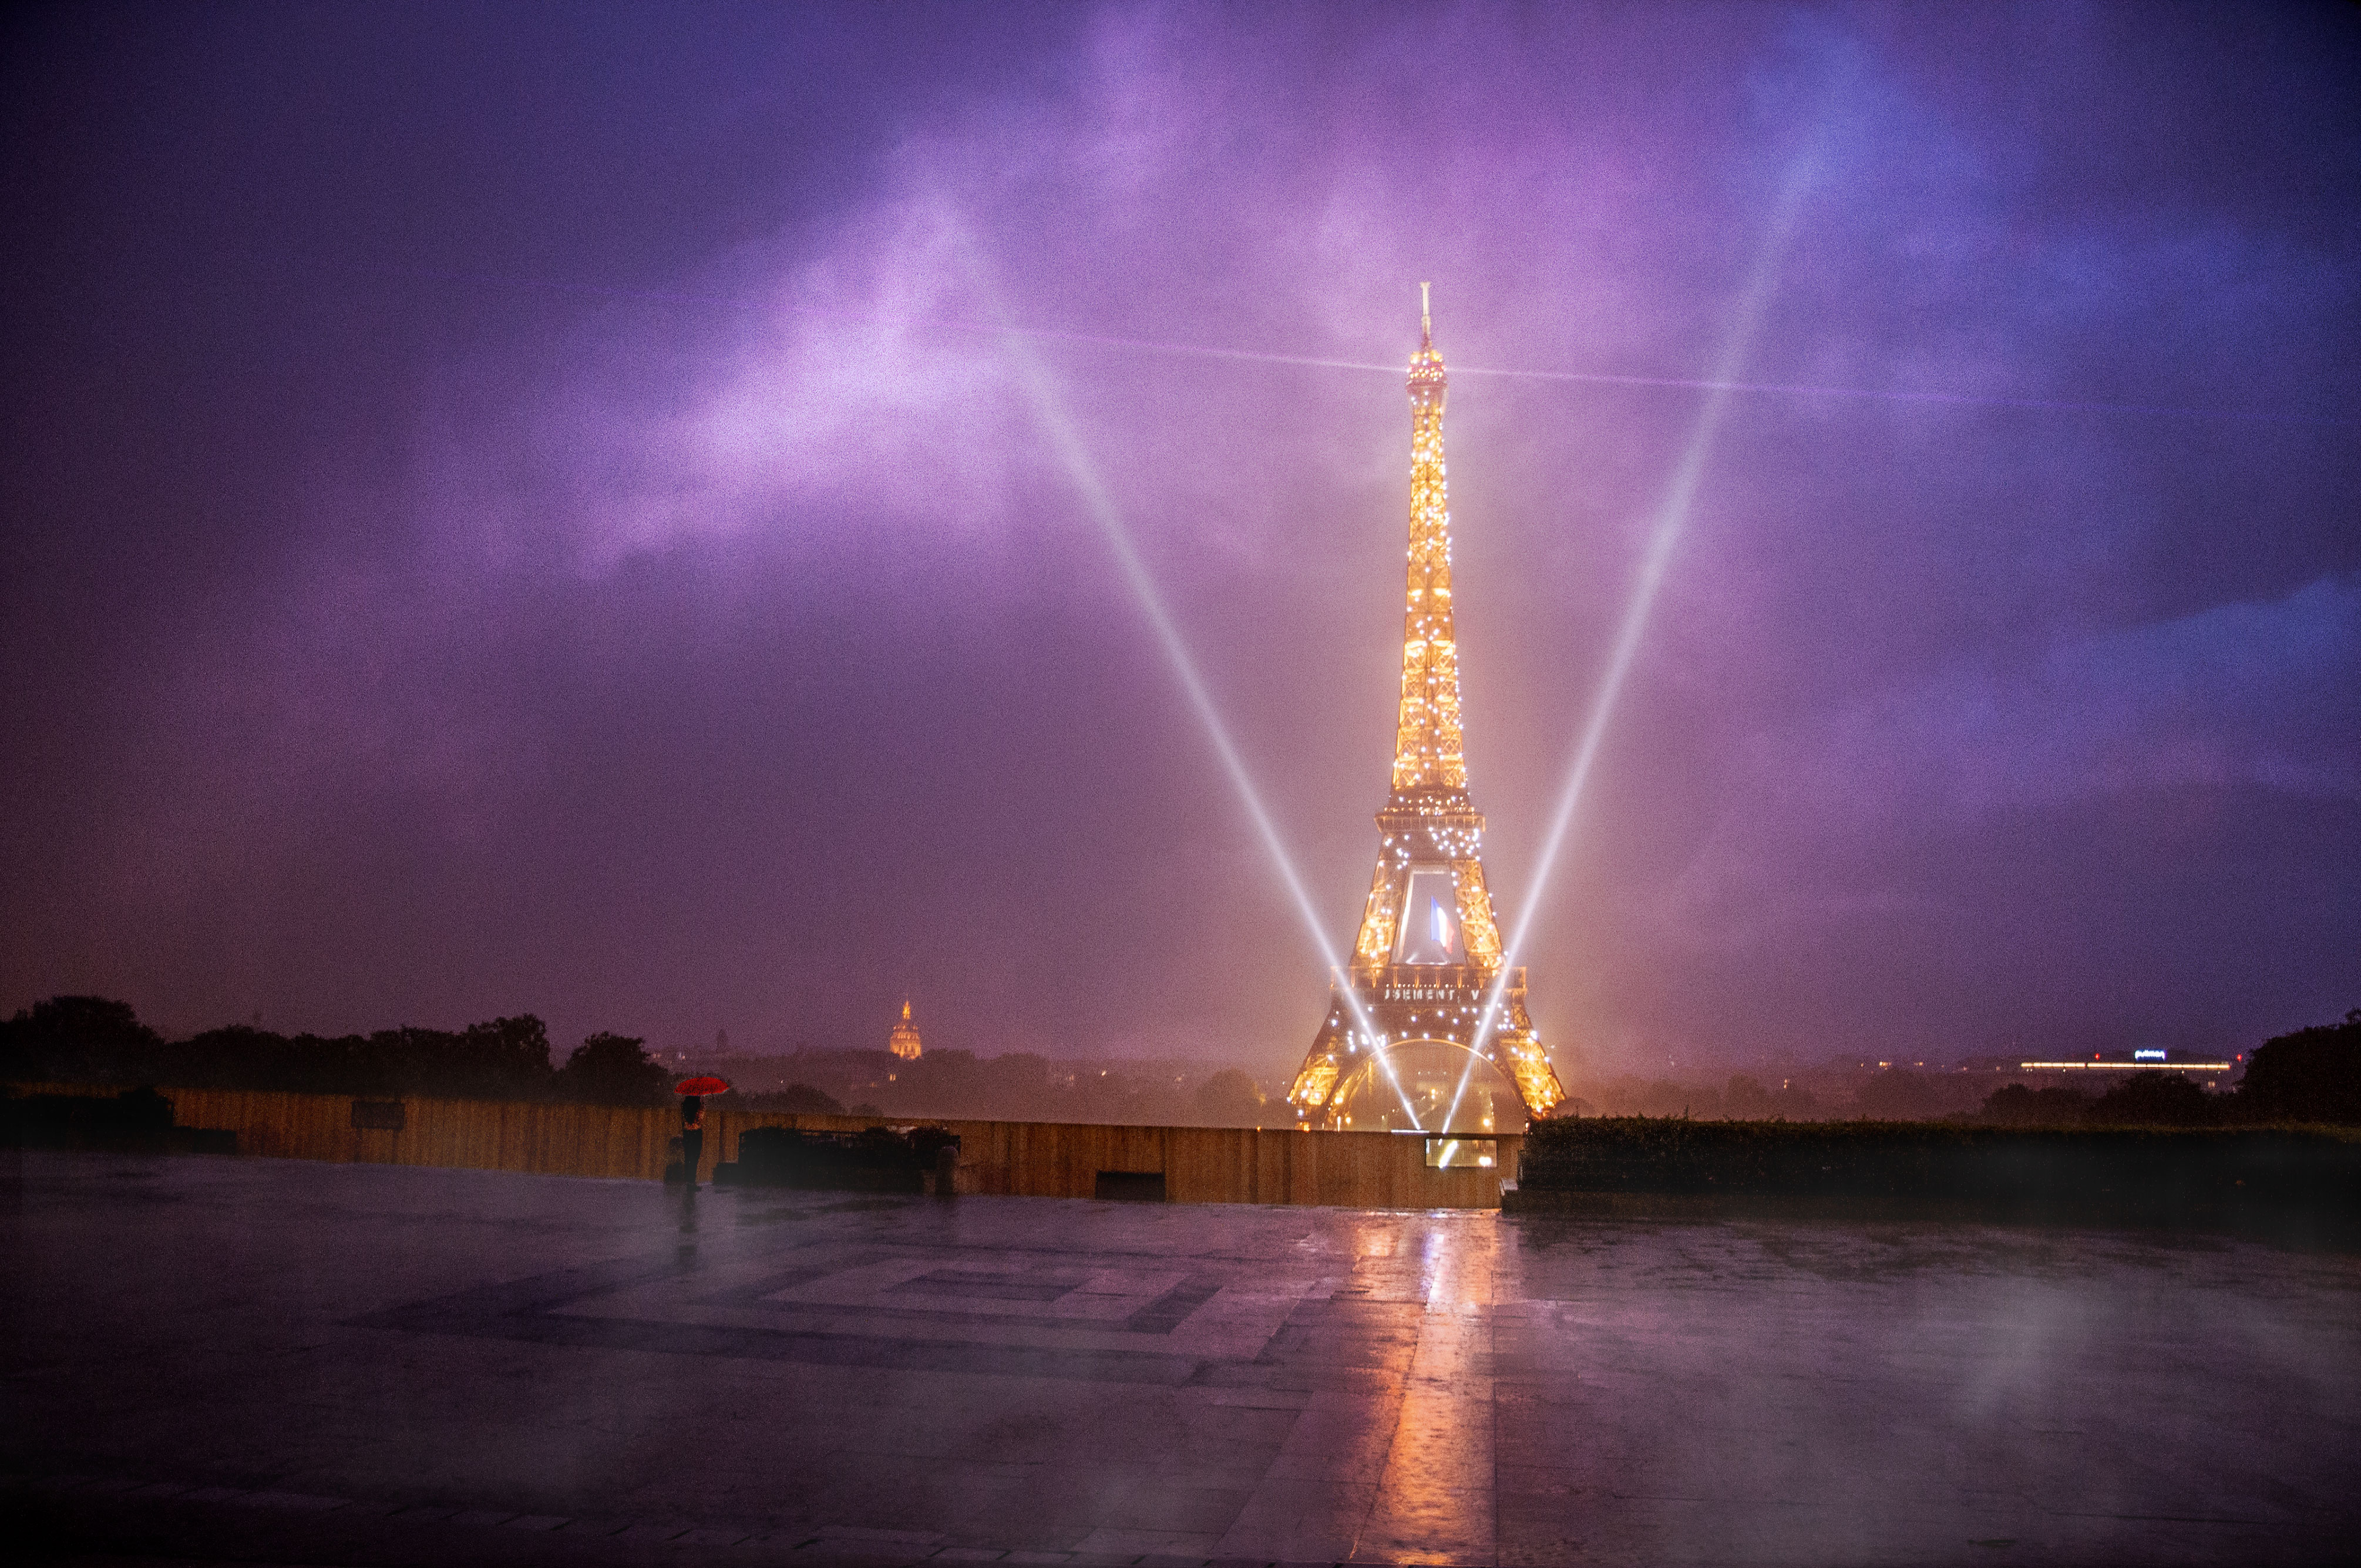 Paris Eiffel Tower view from Trocadero under storm, cloud dans heavy rain with a girl with a red umbrella. The Tour Eiffel is lit especially to thanks medical staff due to coronavirus COVID-19 2020, (Nos Dren).